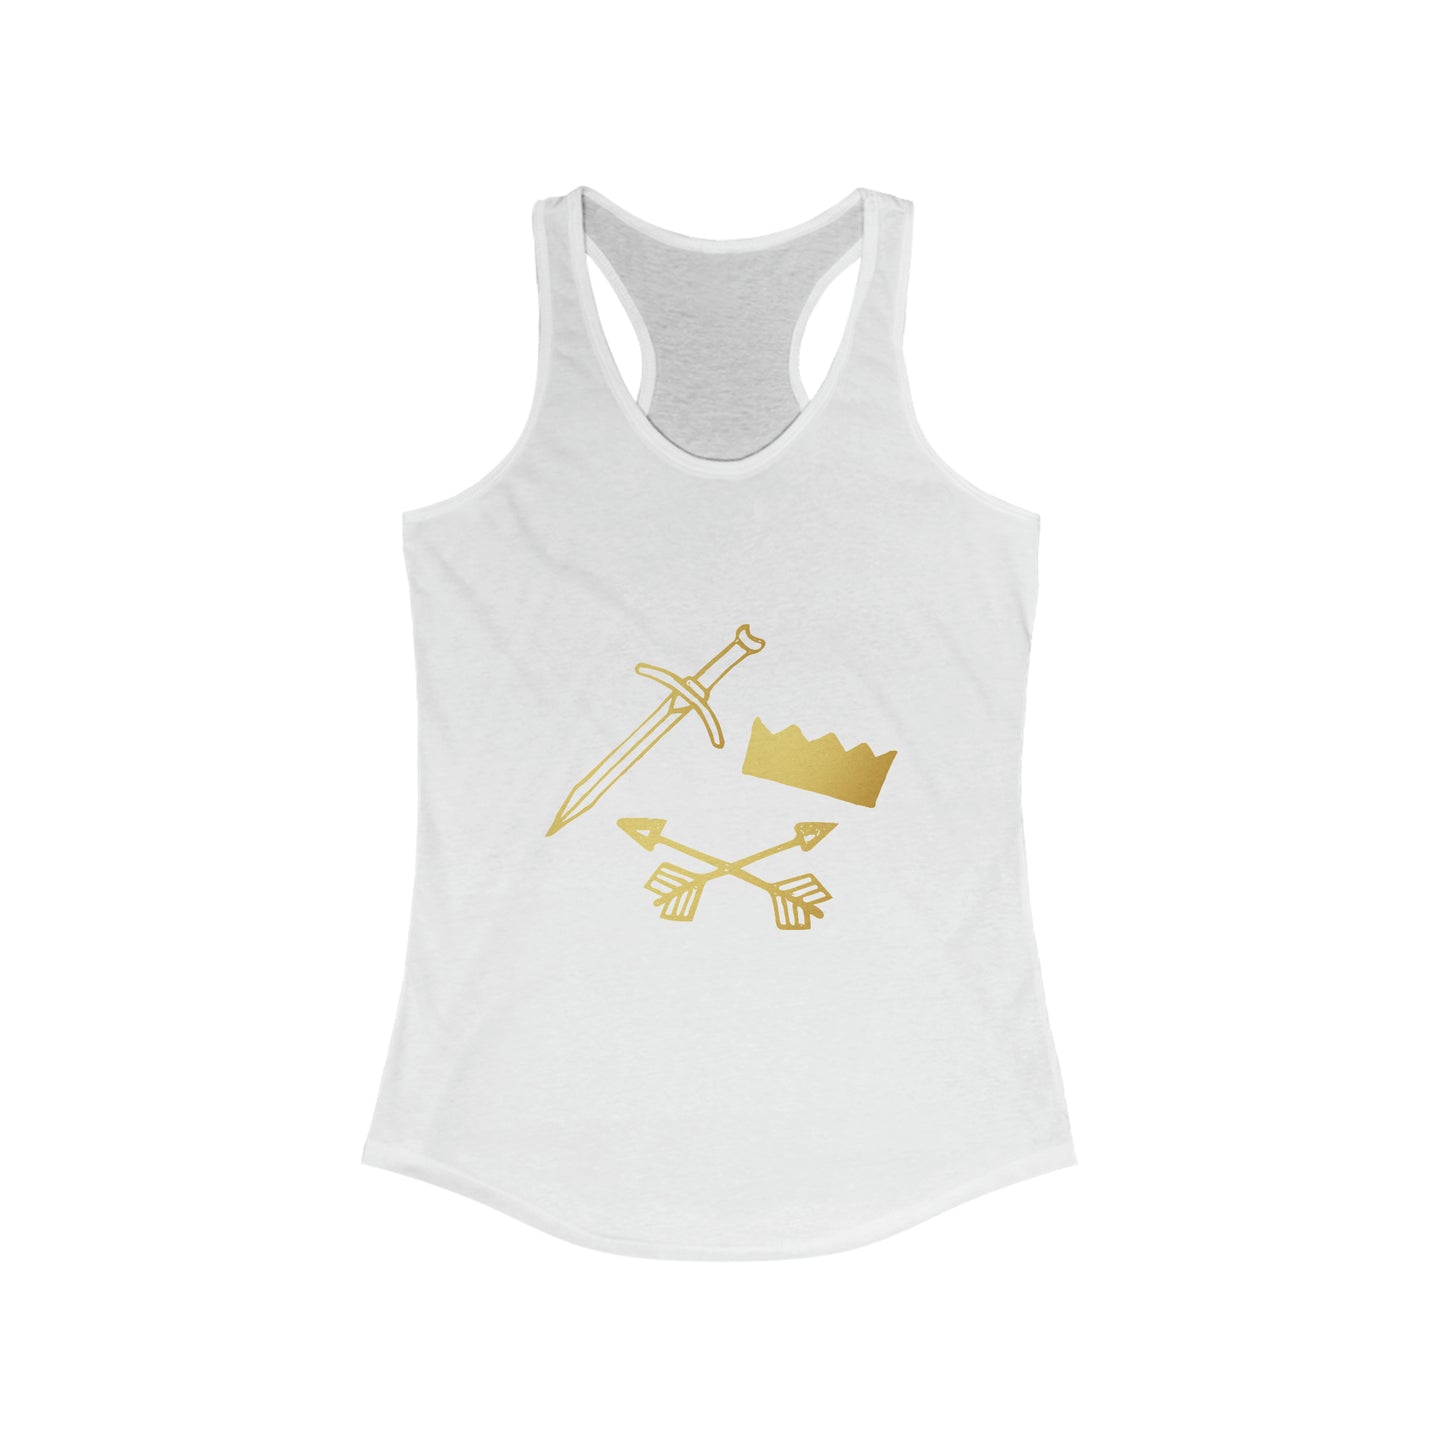 Women's Gold and Bold Warrior - Ideal Racerback Tank